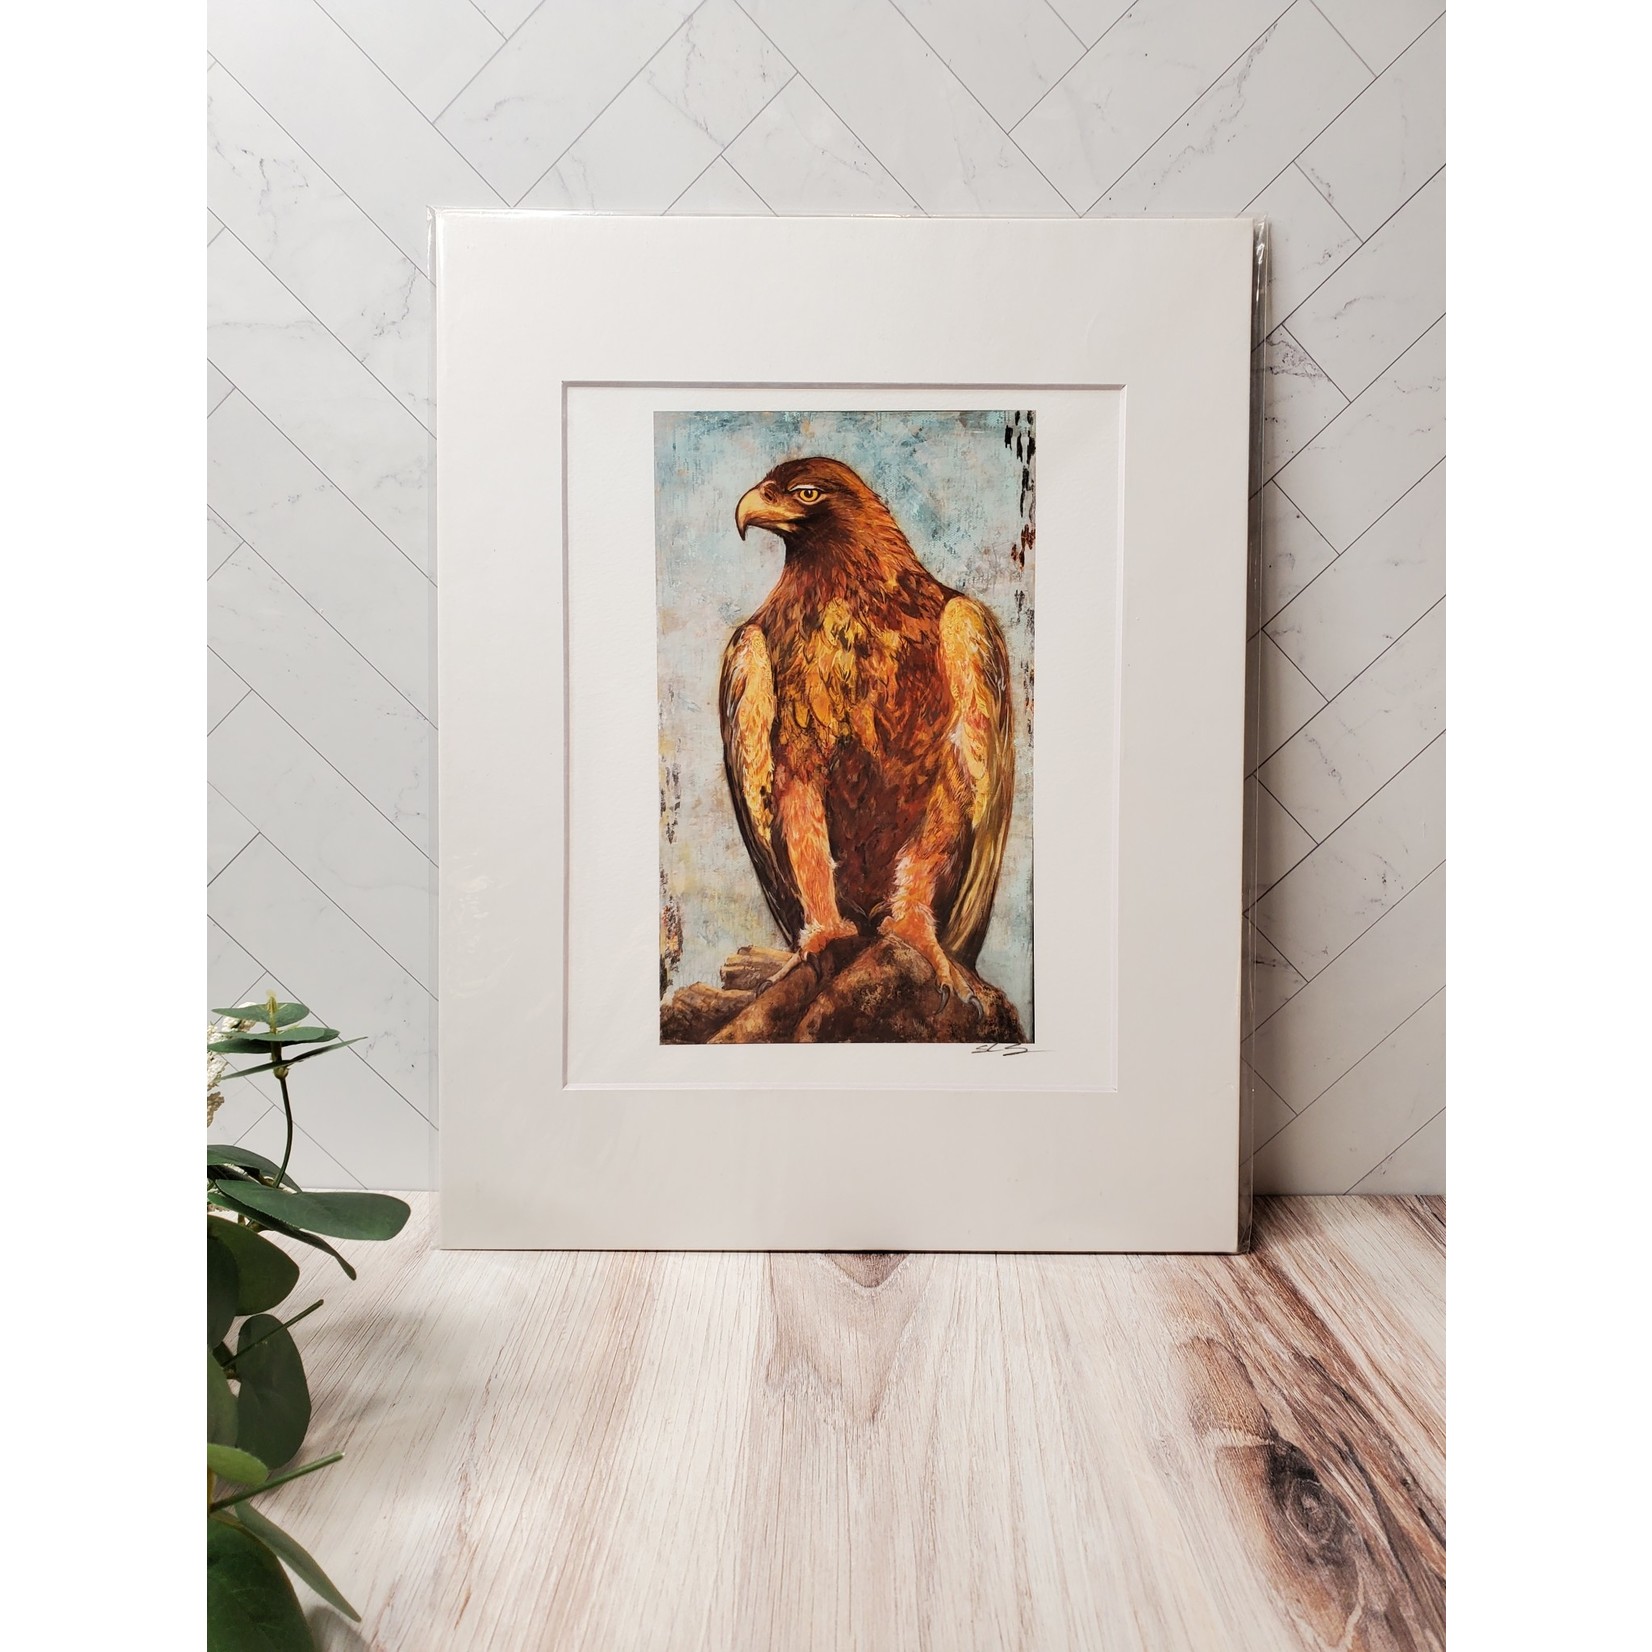 Sara L Smith "Watchful" - archival giclee print - matted - 11x14"